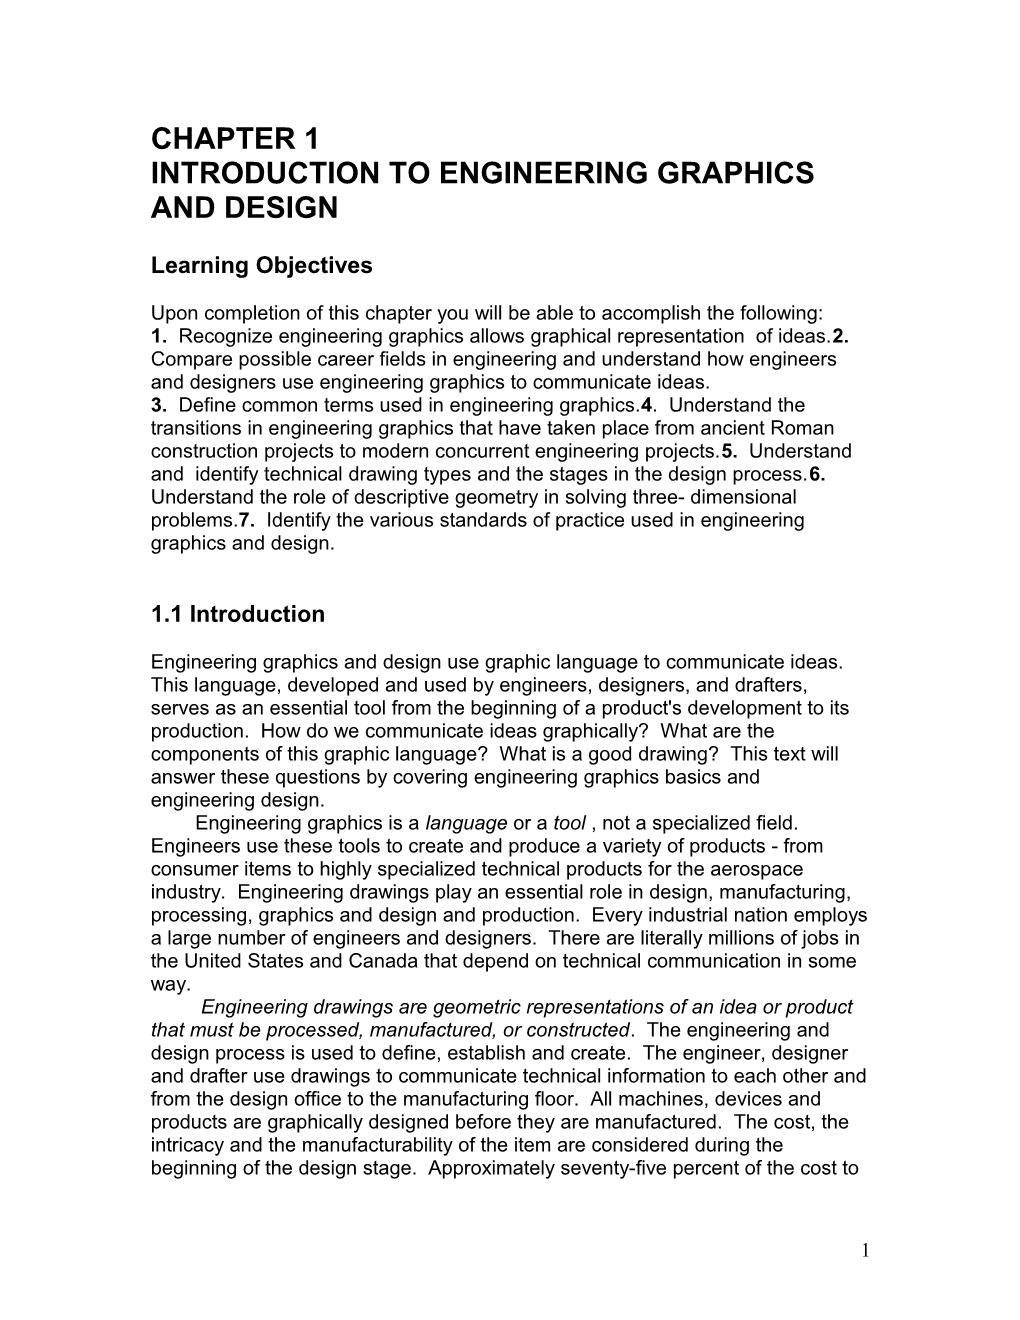 Introduction to Engineering Graphics and Design